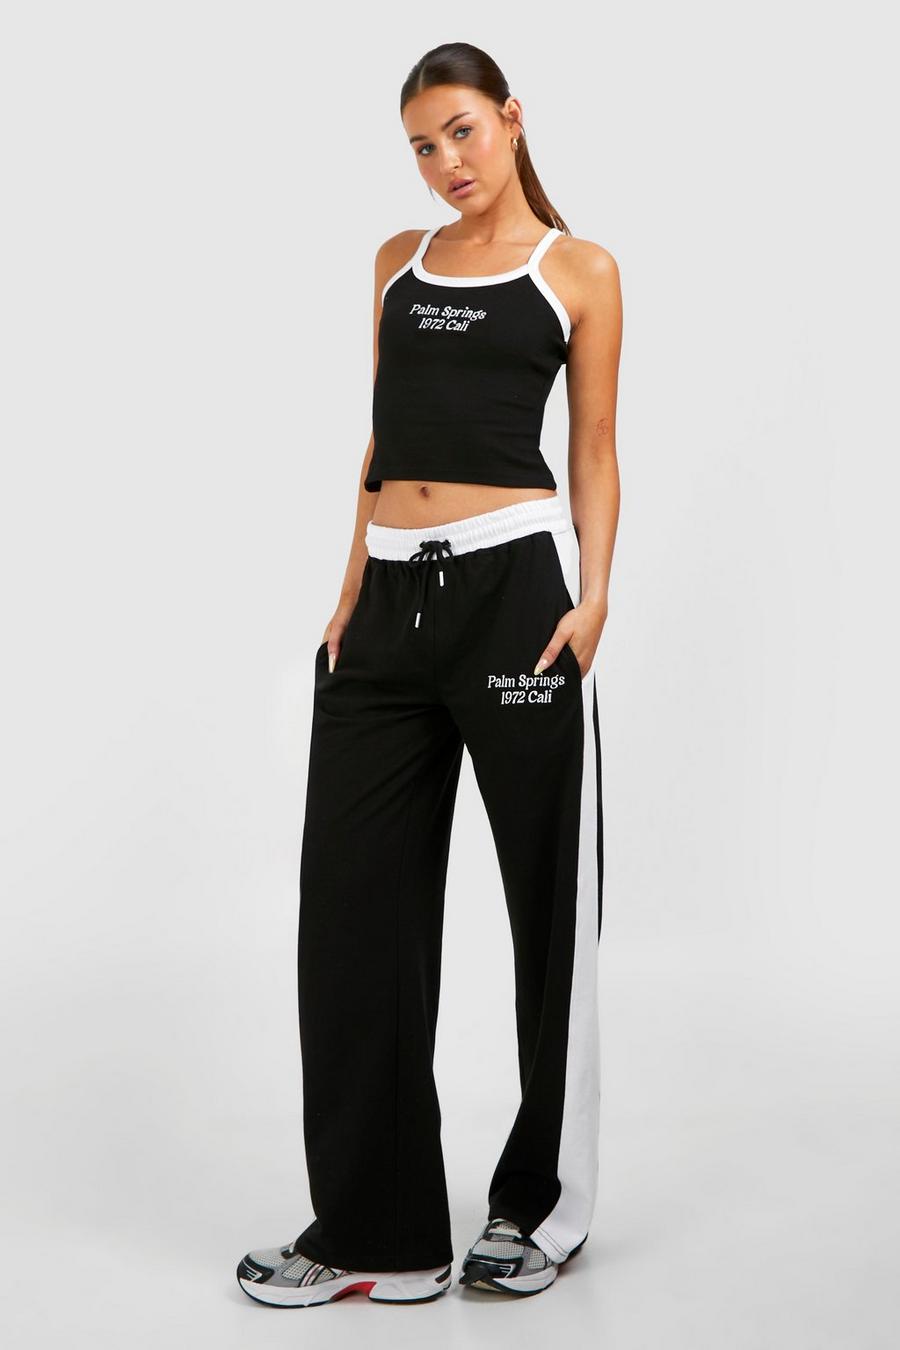 Black Palm Springs Contrast Printed Tank Top Top And Jogger Set image number 1